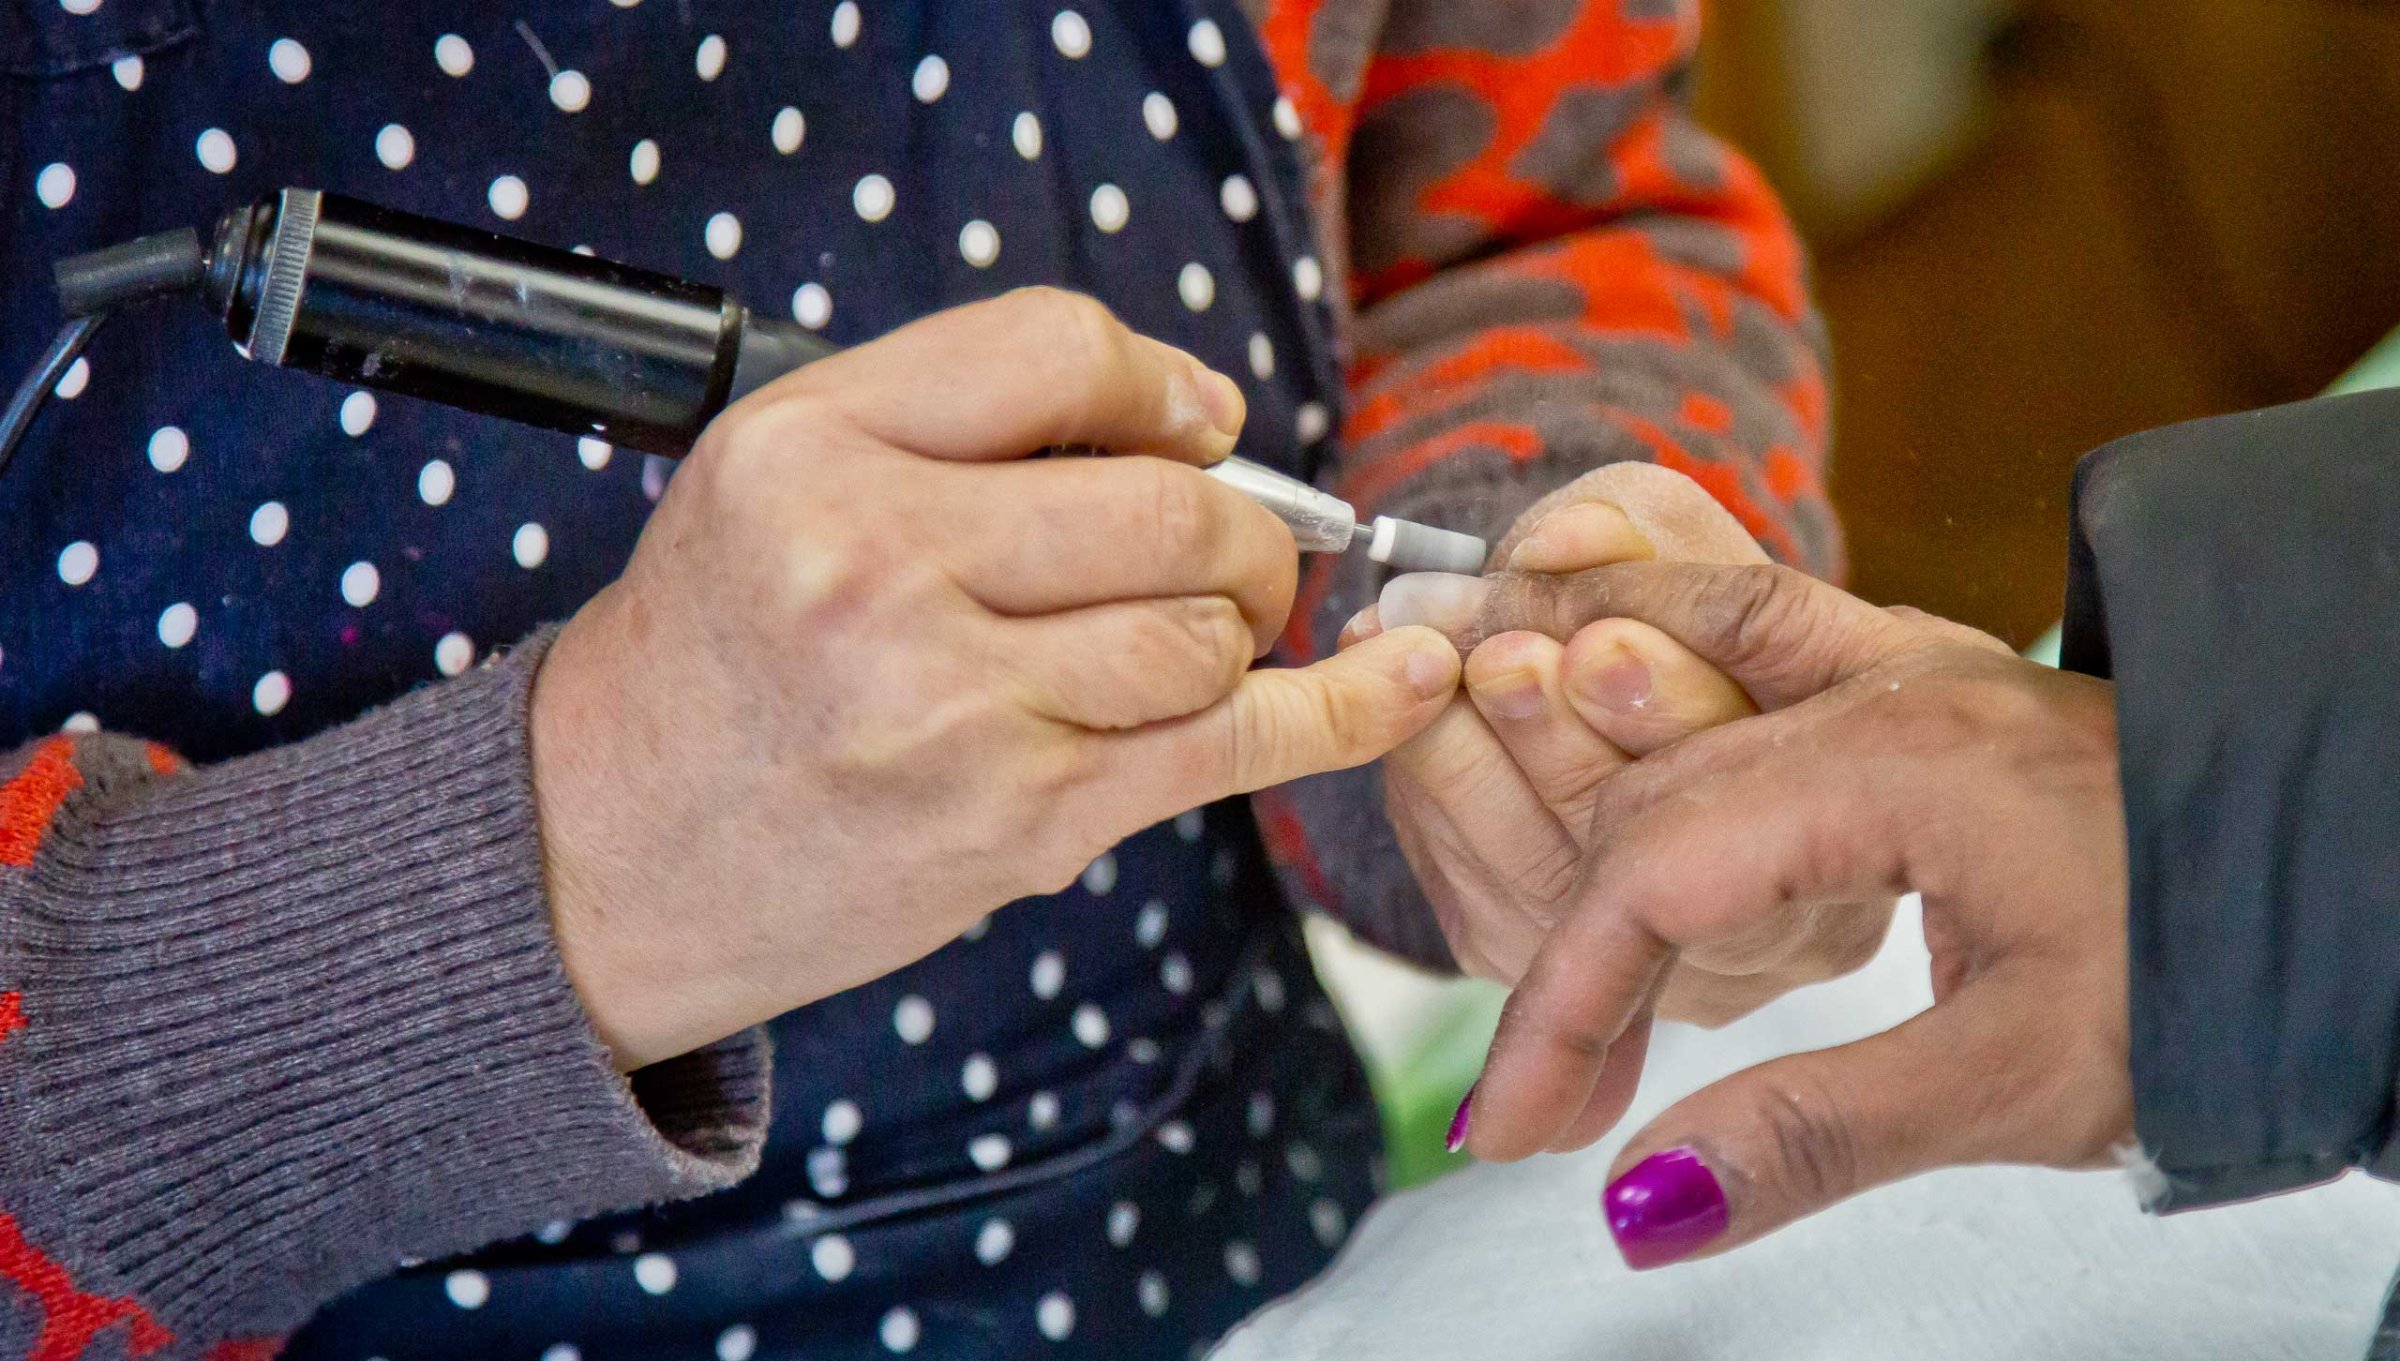 A customer receives a manicure at Castle nail salon in New York City on Jan. 8, 2015.